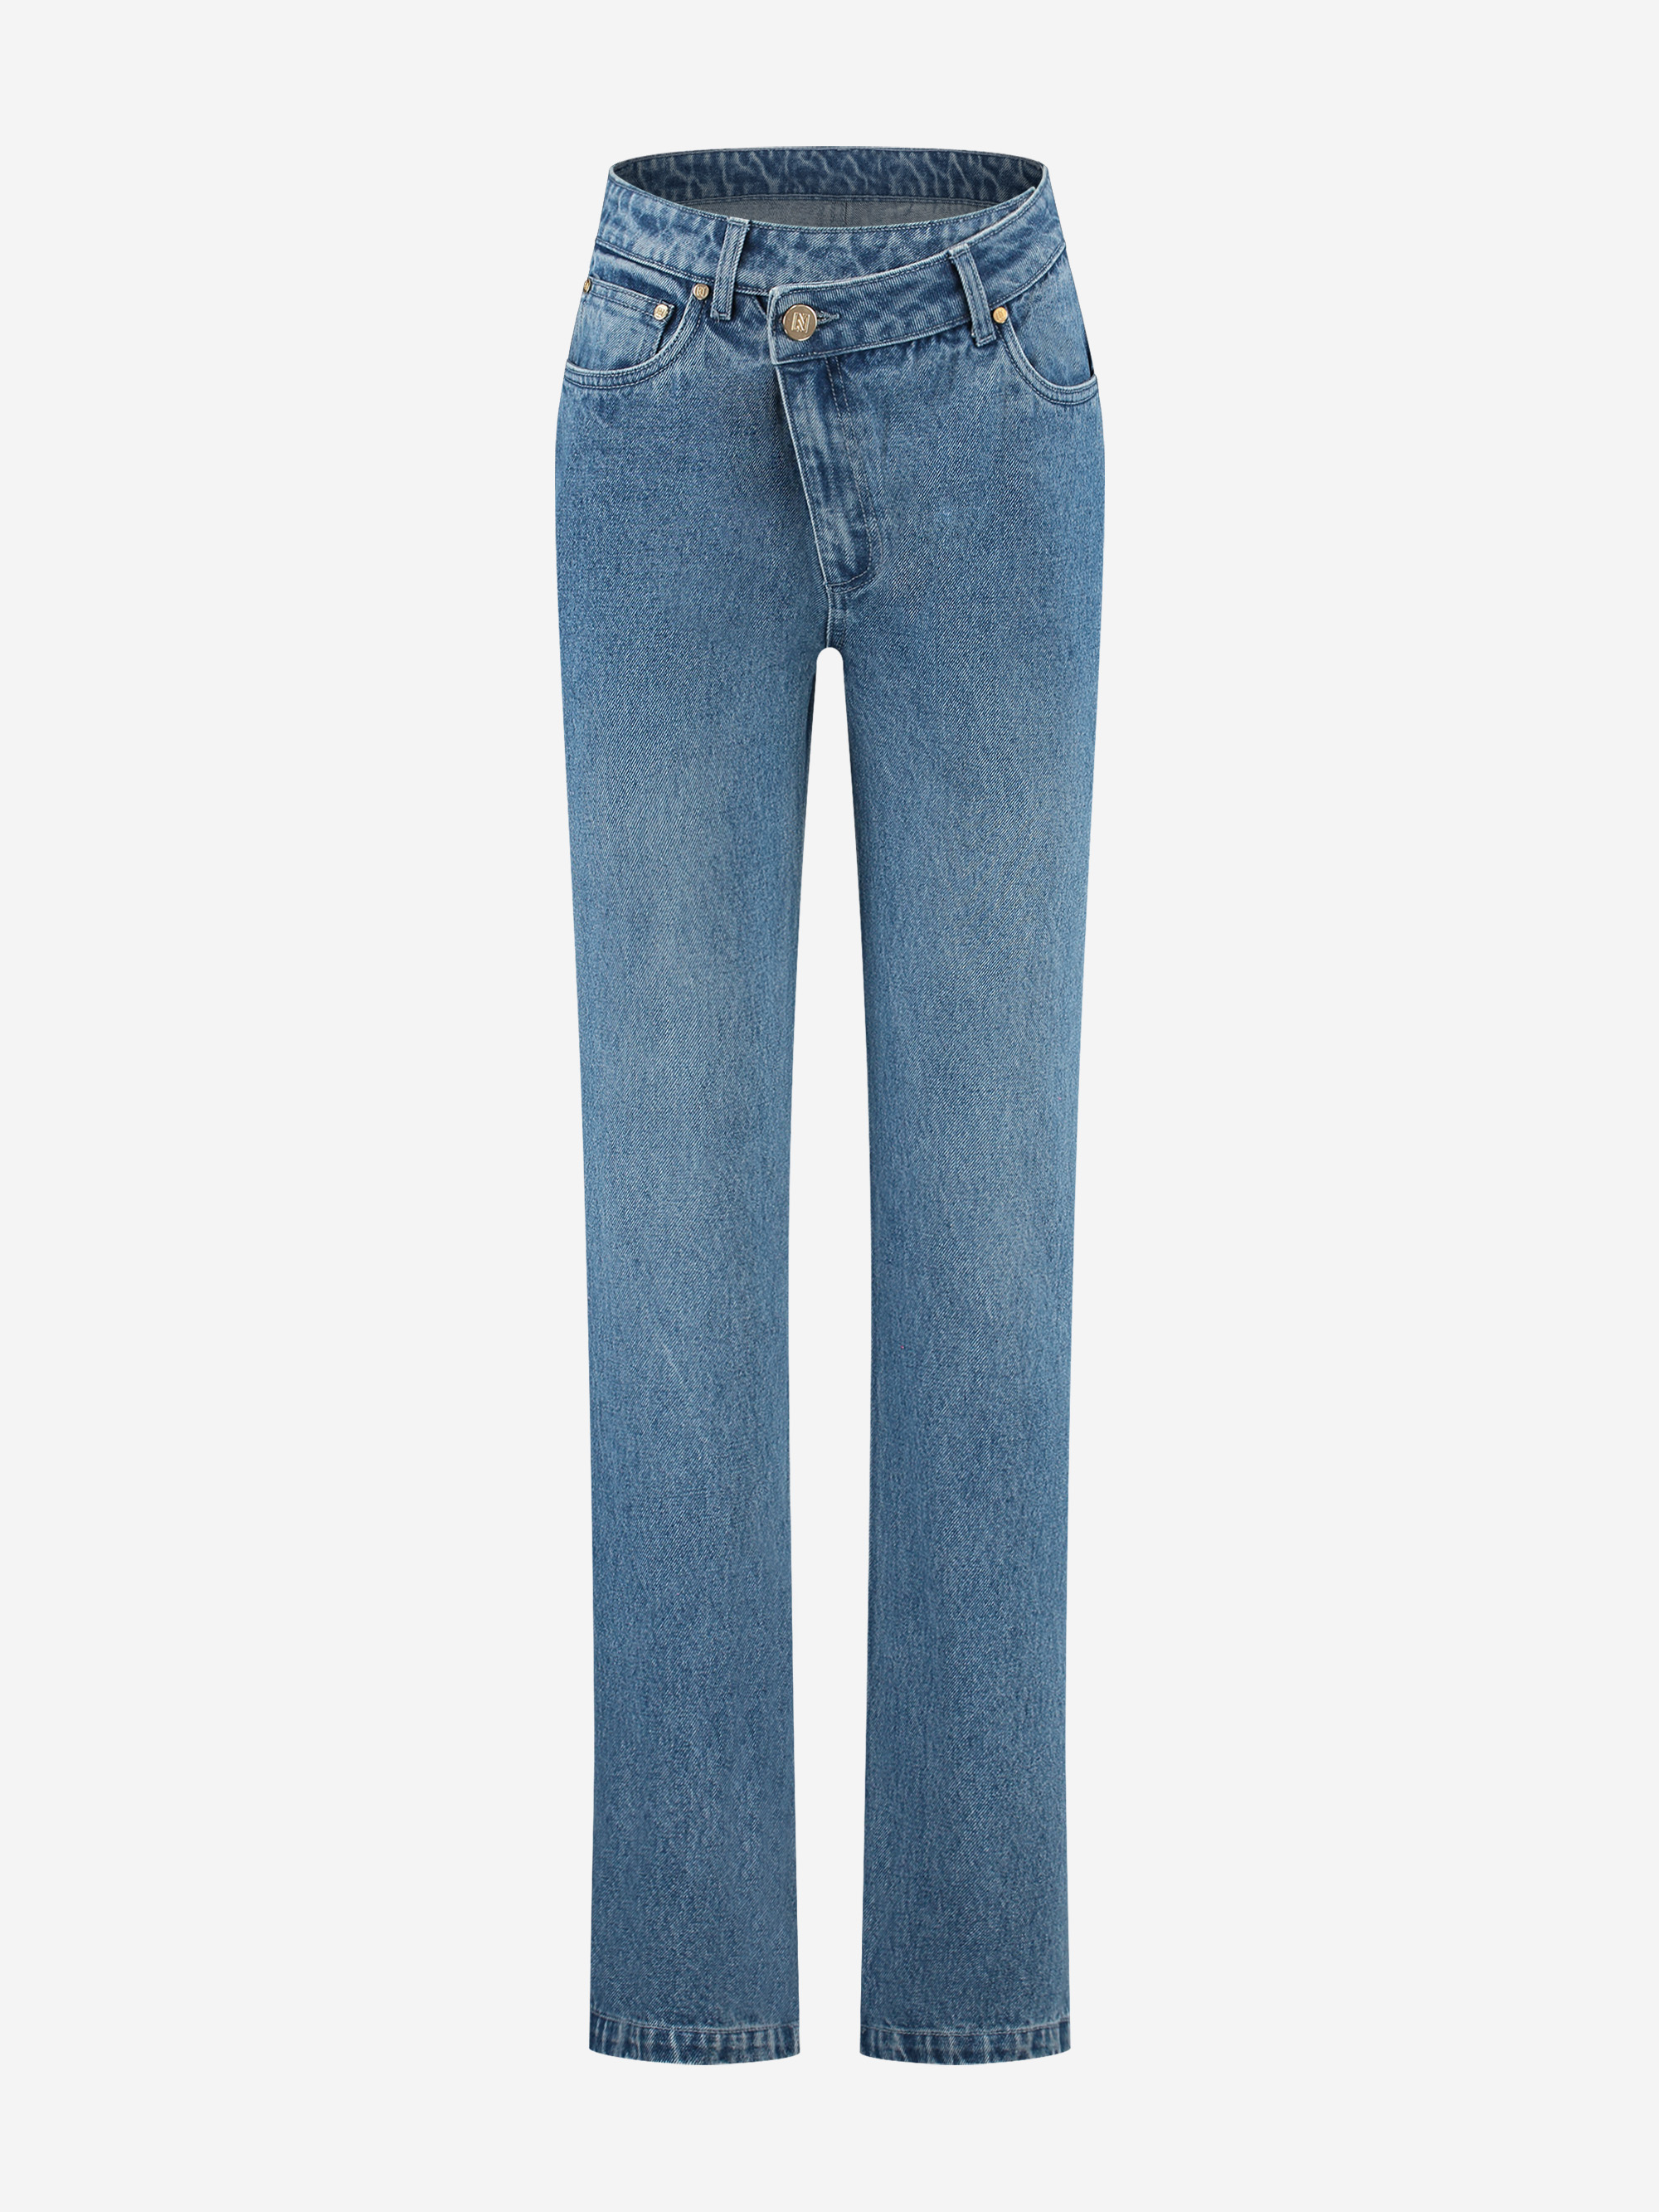 Denim jeans with crossed waistband